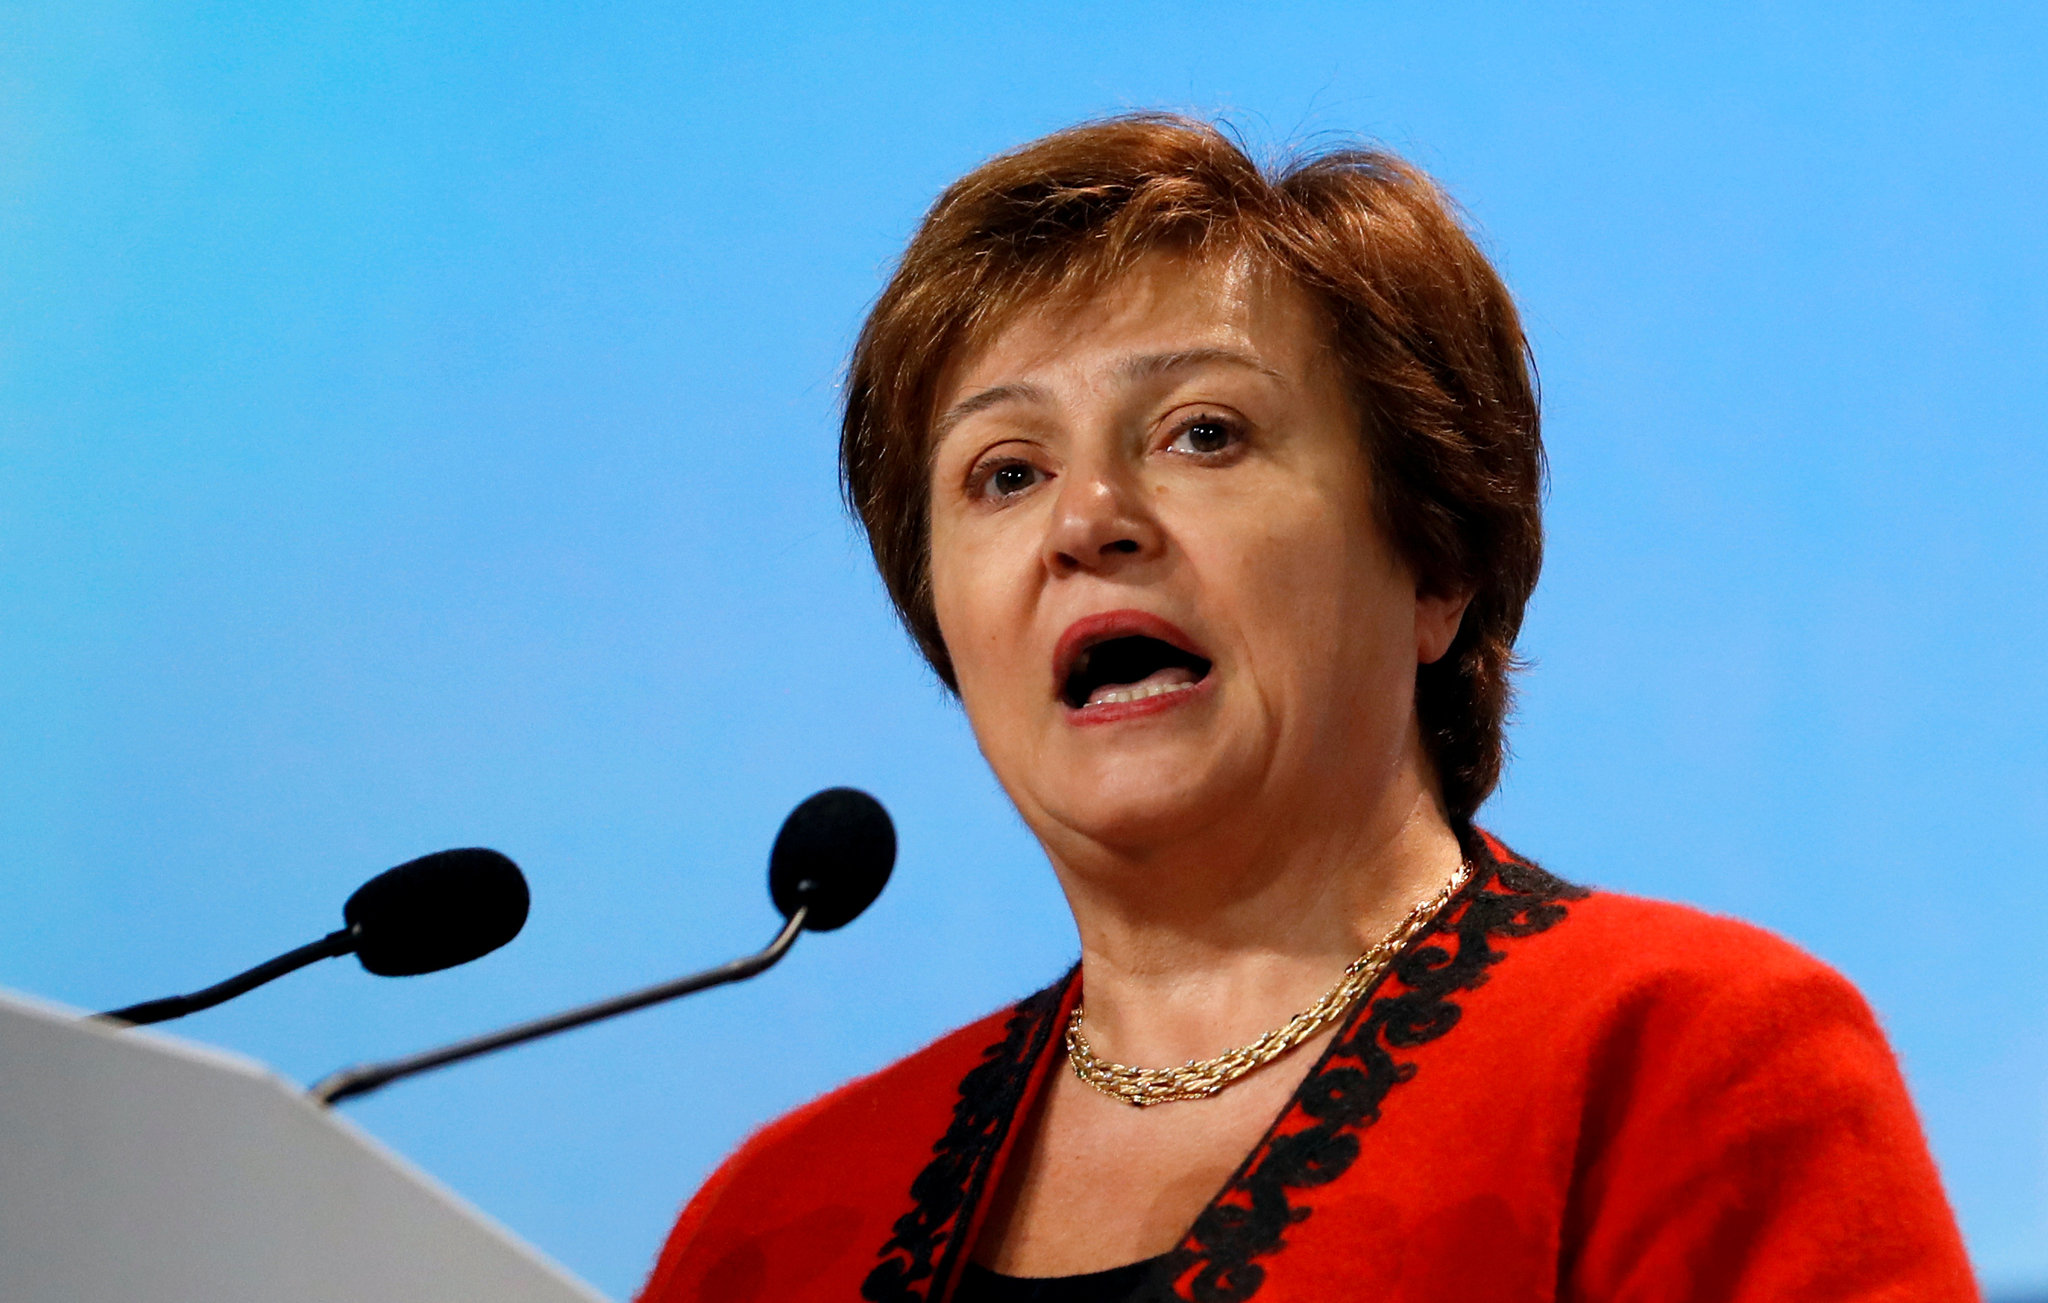 IMF Managing Director Kristalina Georgieva: You should not withdraw financial and monetary support policies prematurely